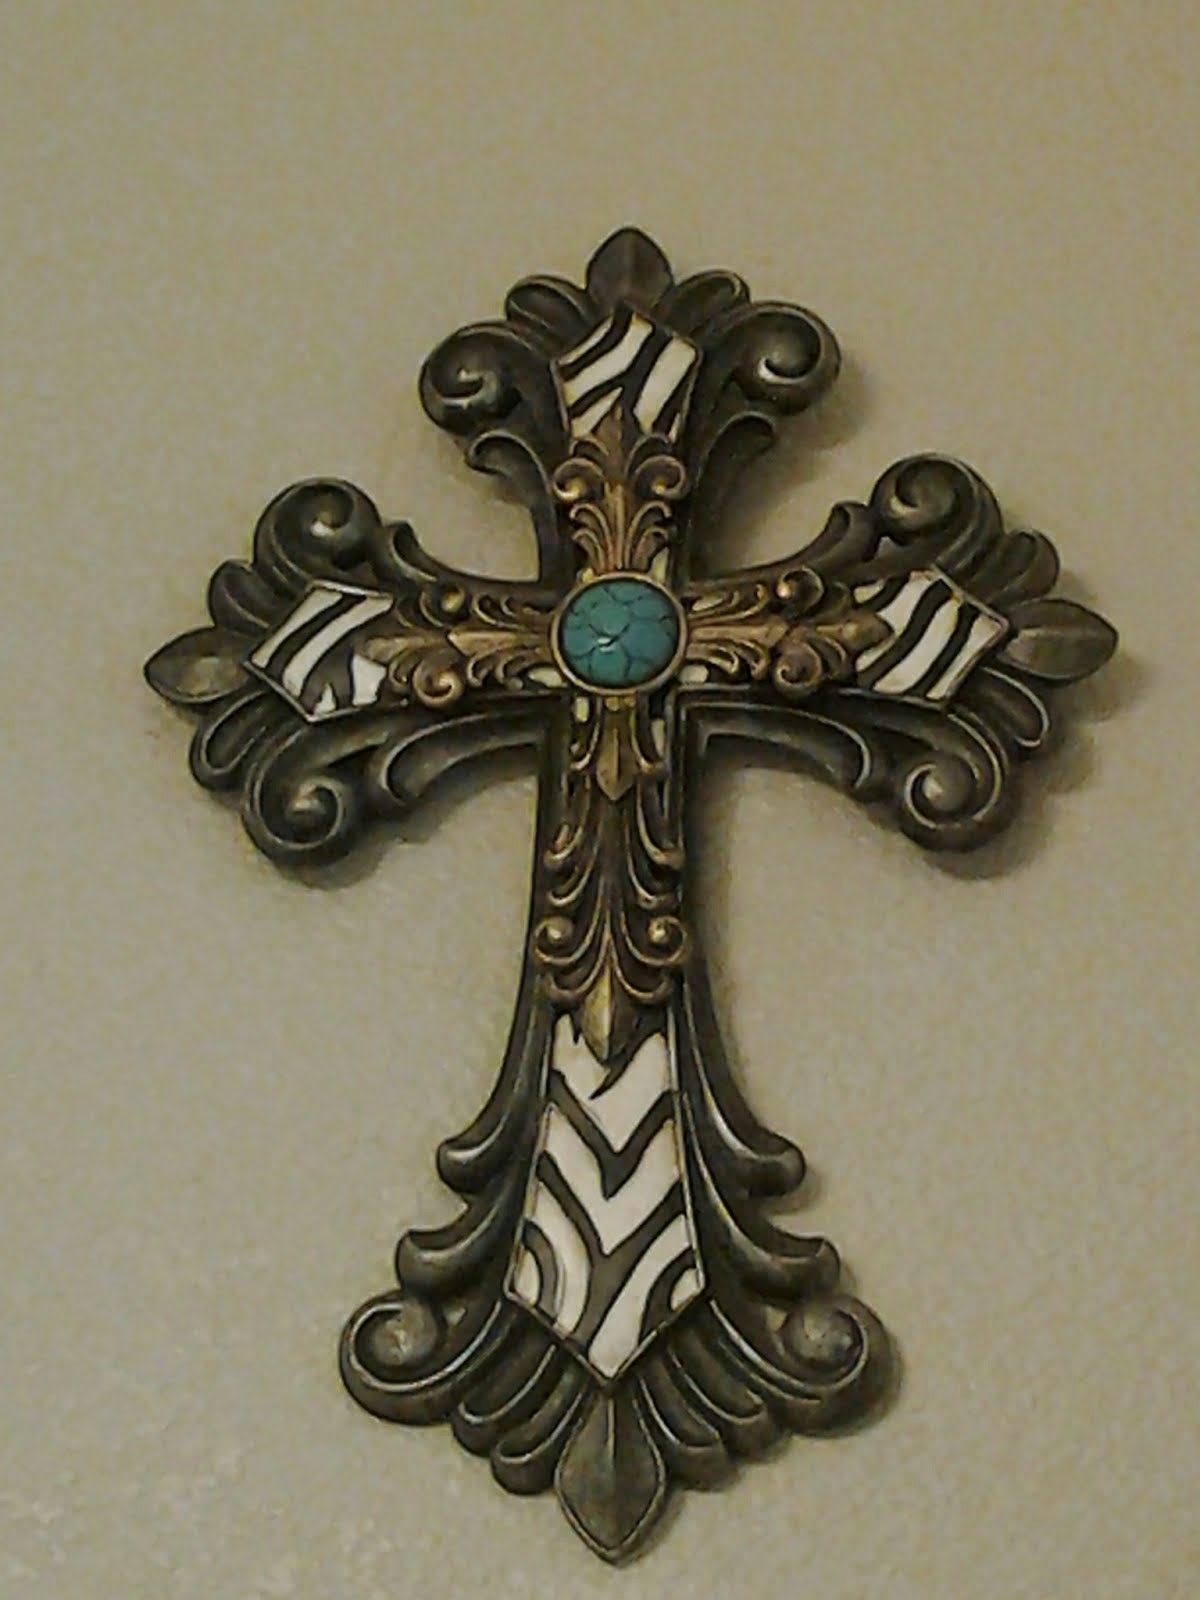 Pretty cross decor with turquoise pendant $sold